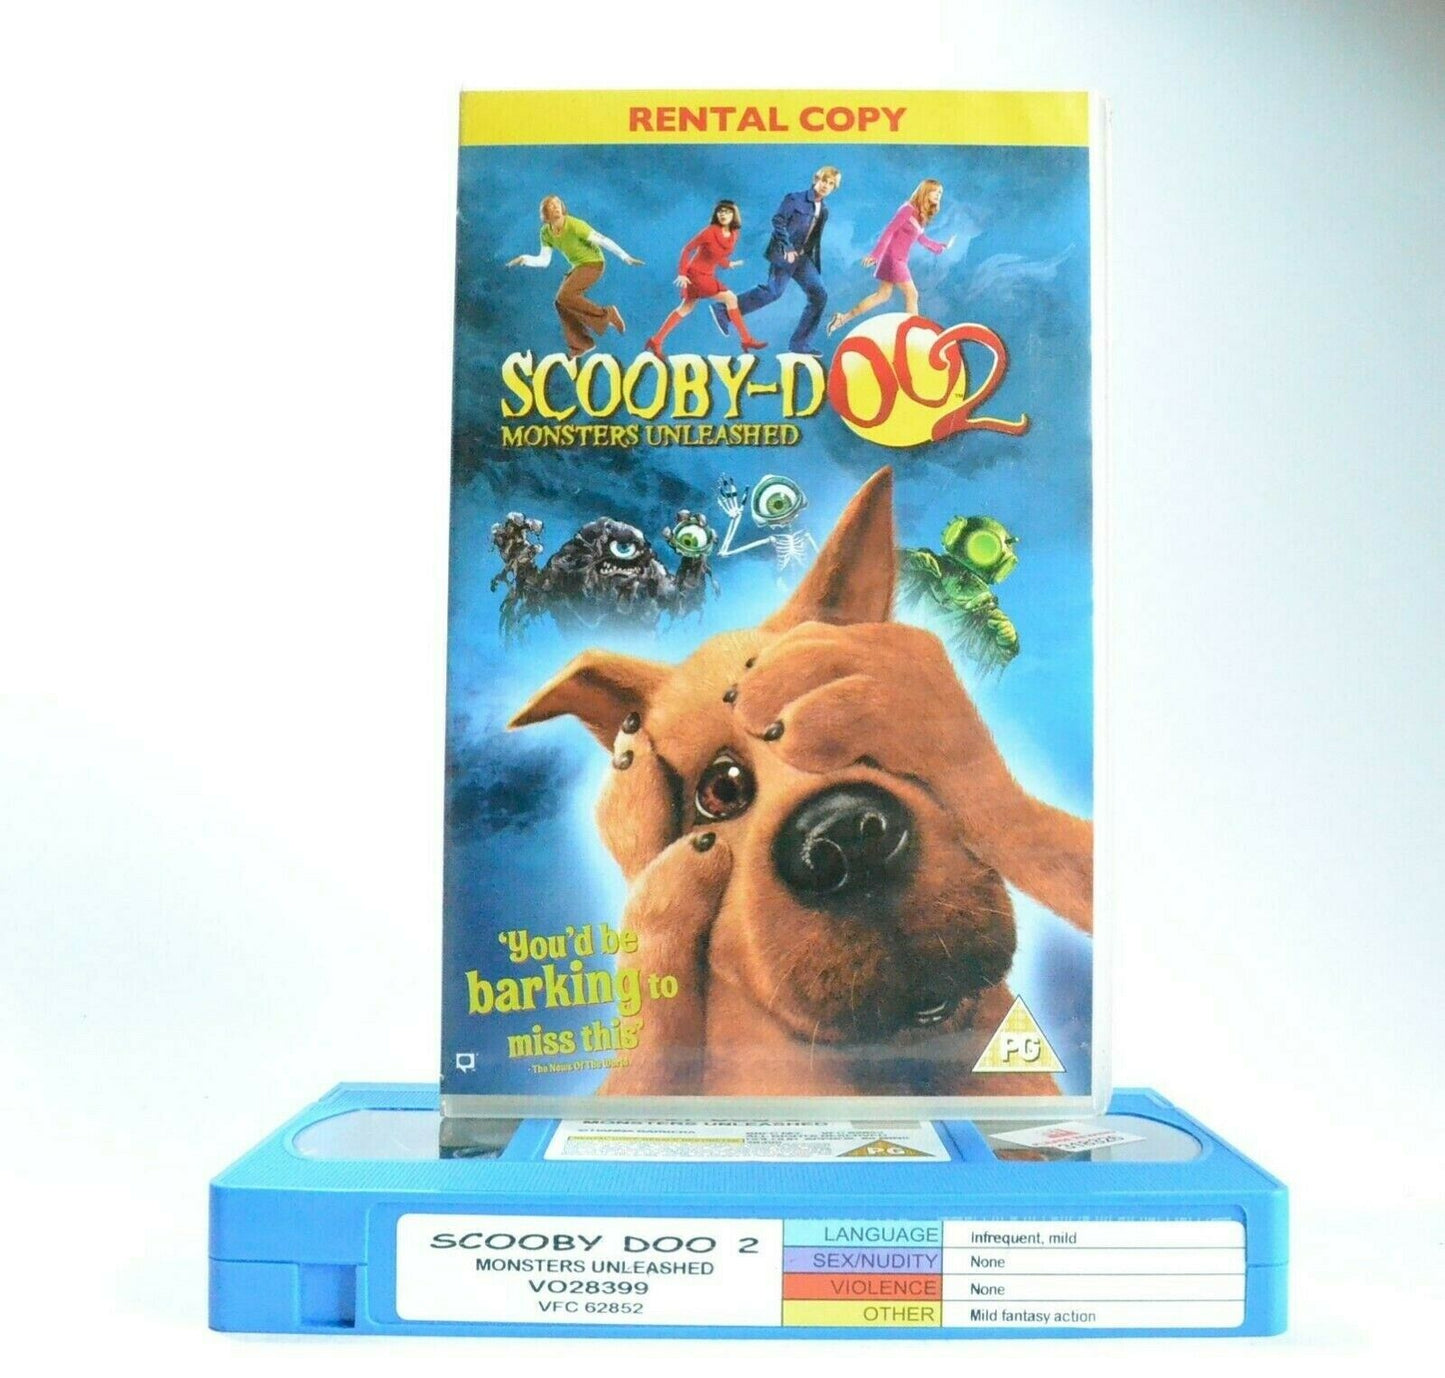 Scooby-Doo 2: Monsters Unleashed - Large Box - Based On TV Series - Kids - VHS-